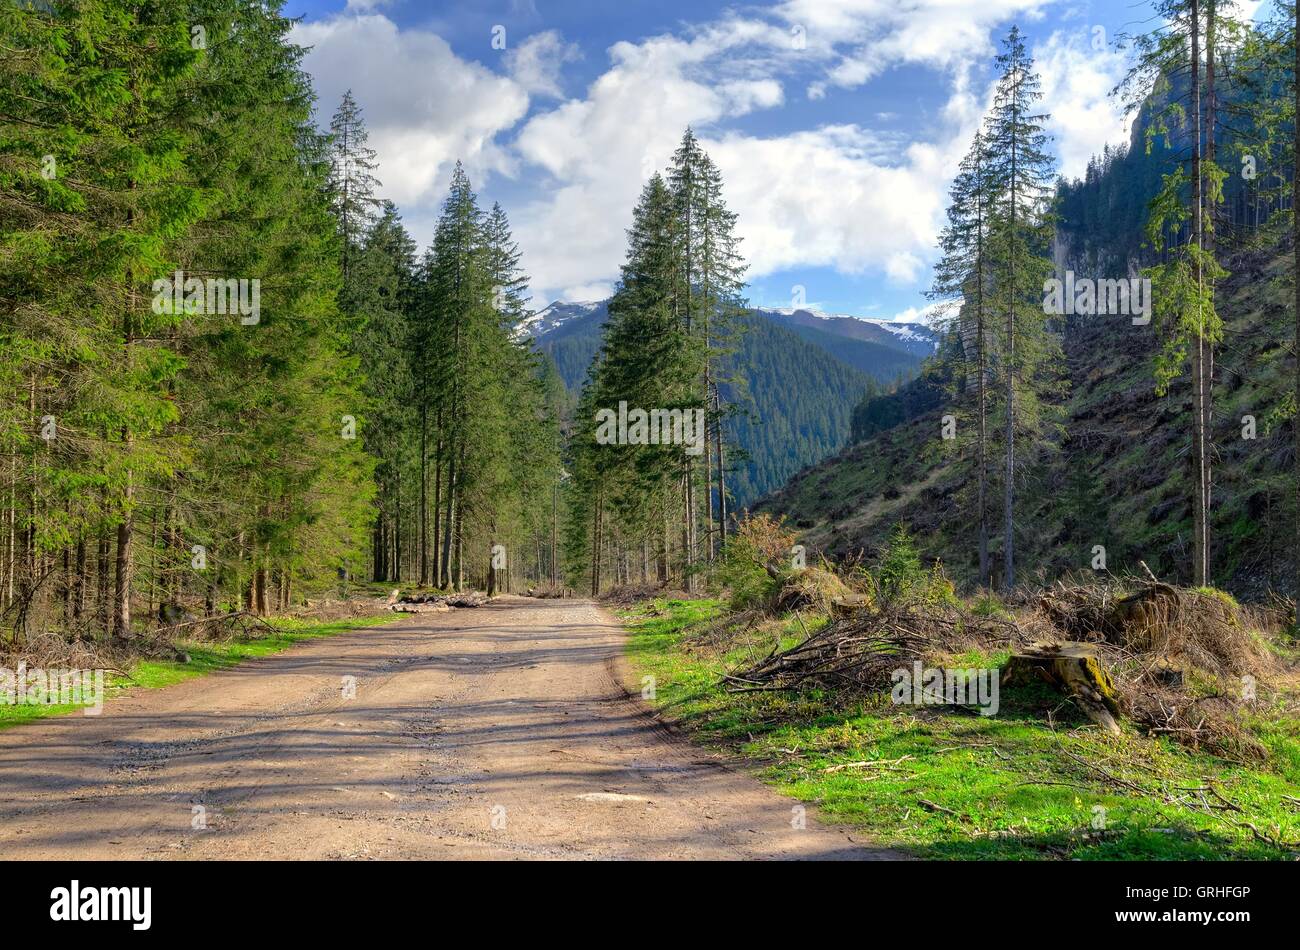 Spring sunny mountain landscape. Gravel forest road in a beautiful mountain valley. Stock Photo